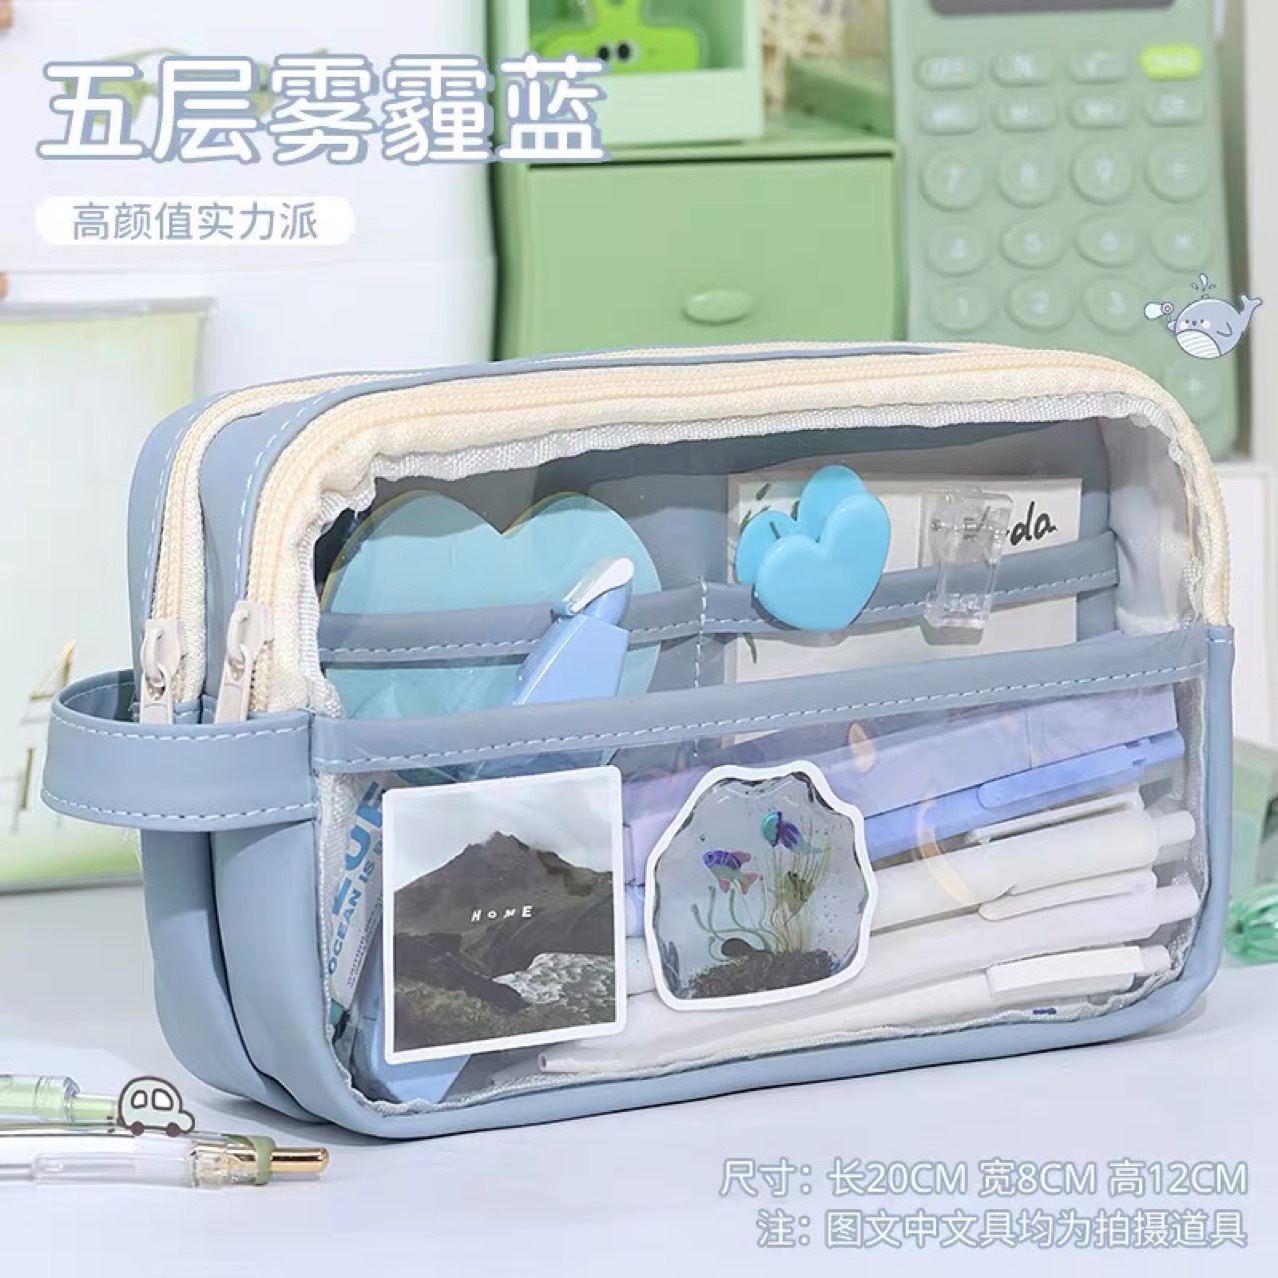 Handheld Double Deck Transparent Large Capacity Multifunctional Pencil Case Good-looking Student Storage Bag Source Factory Direct Sales